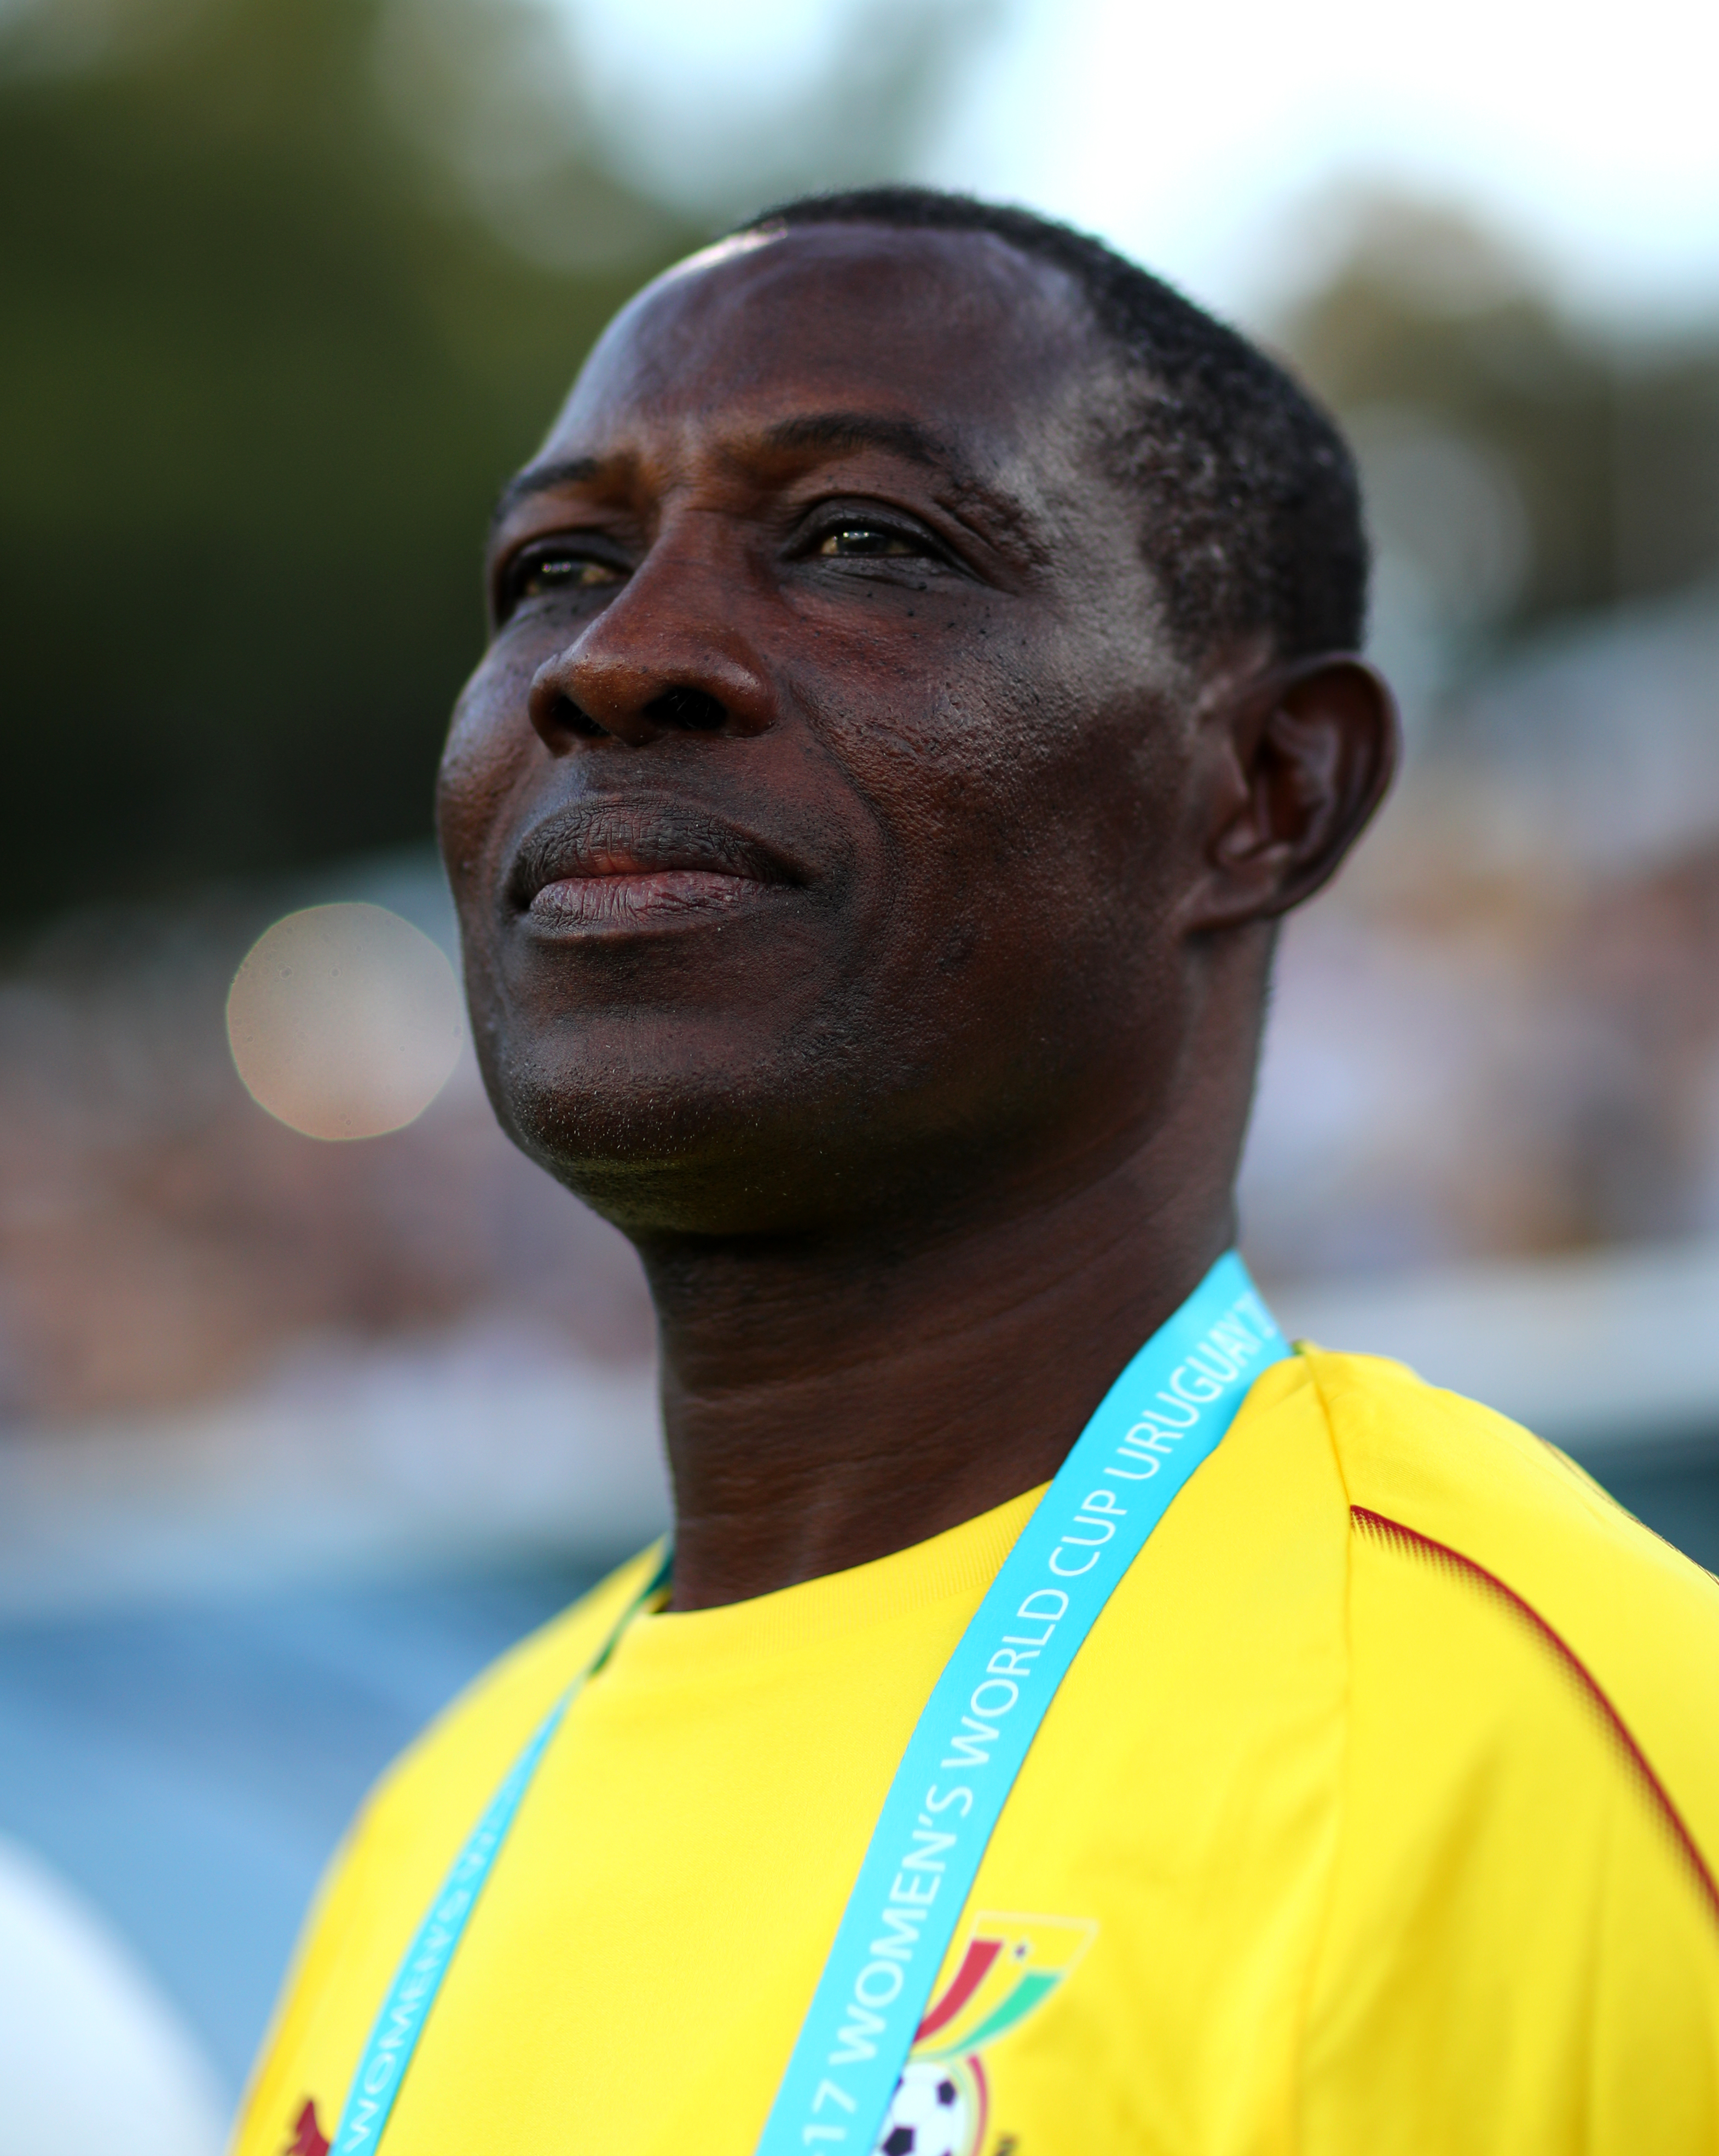 FIFA U17 WWC: Coach Adotey names strong side to face New Zealand